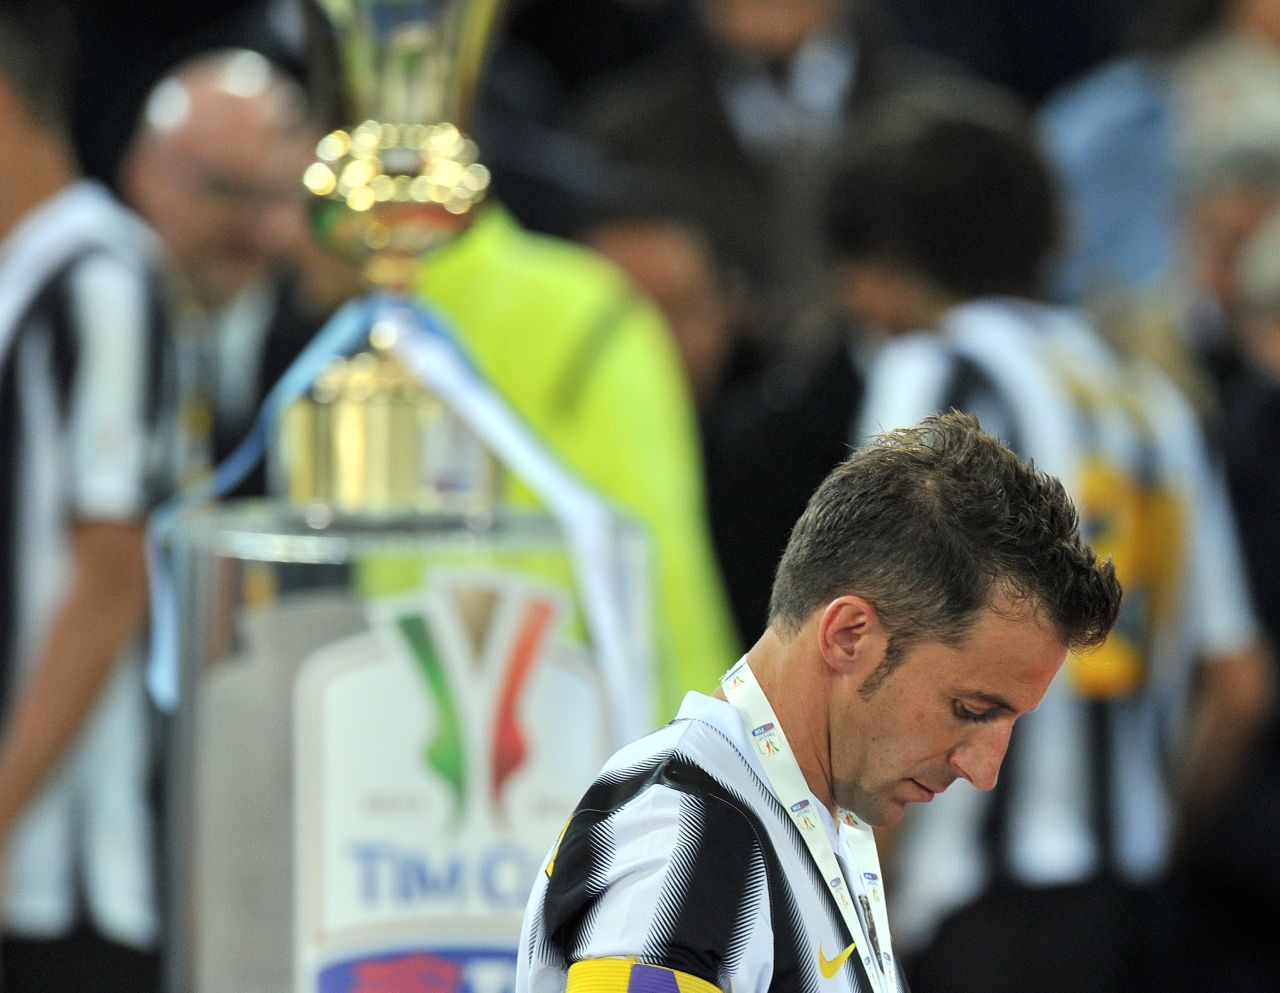 Alessandro Del Piero suffered a disappointment in his farewell match for Juventus, losing the Coppa Italia final to Napoli to end a 43-game unbeaten run this season.